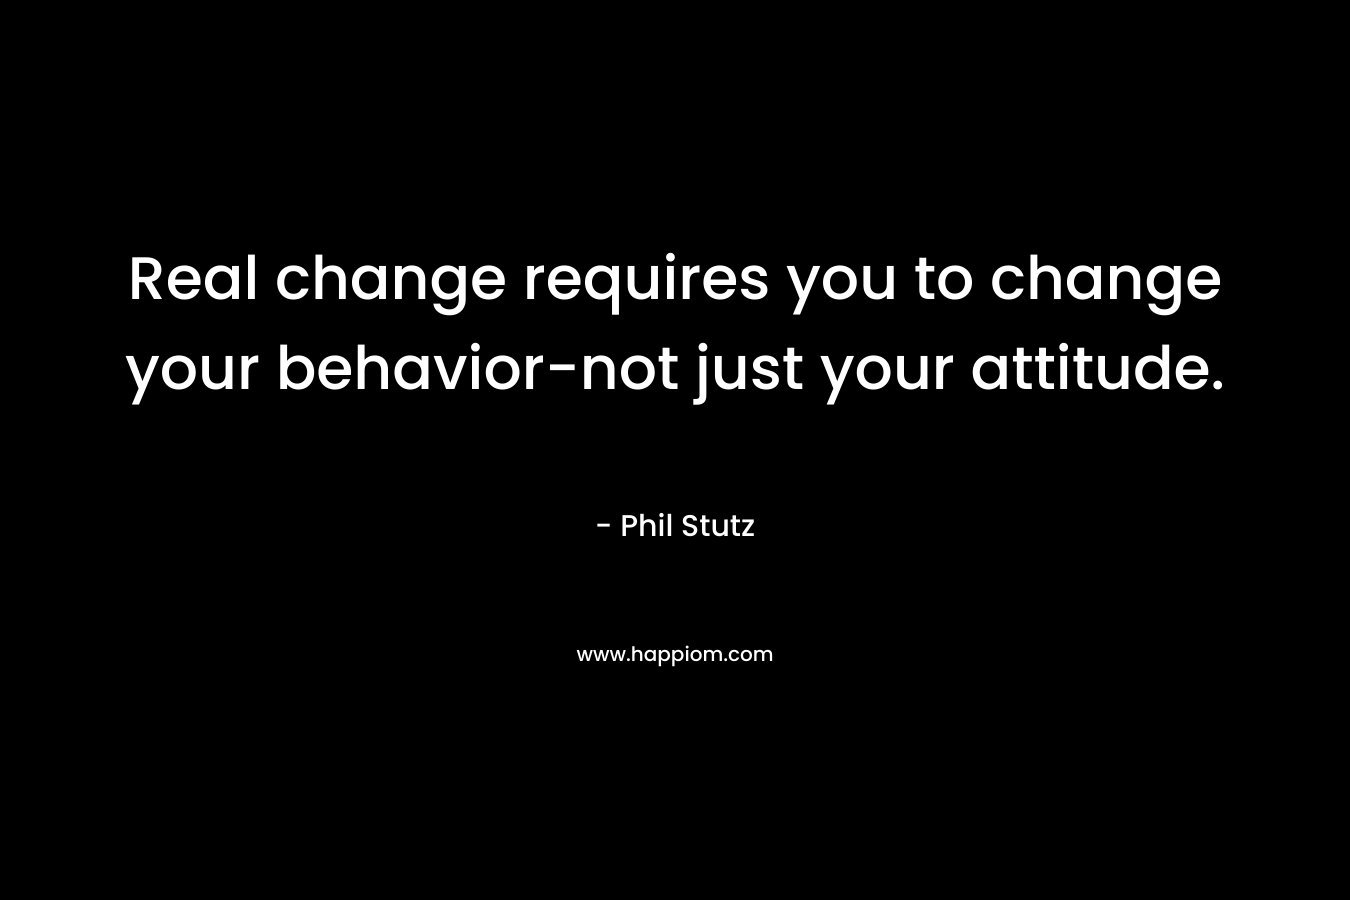 Real change requires you to change your behavior-not just your attitude. – Phil Stutz